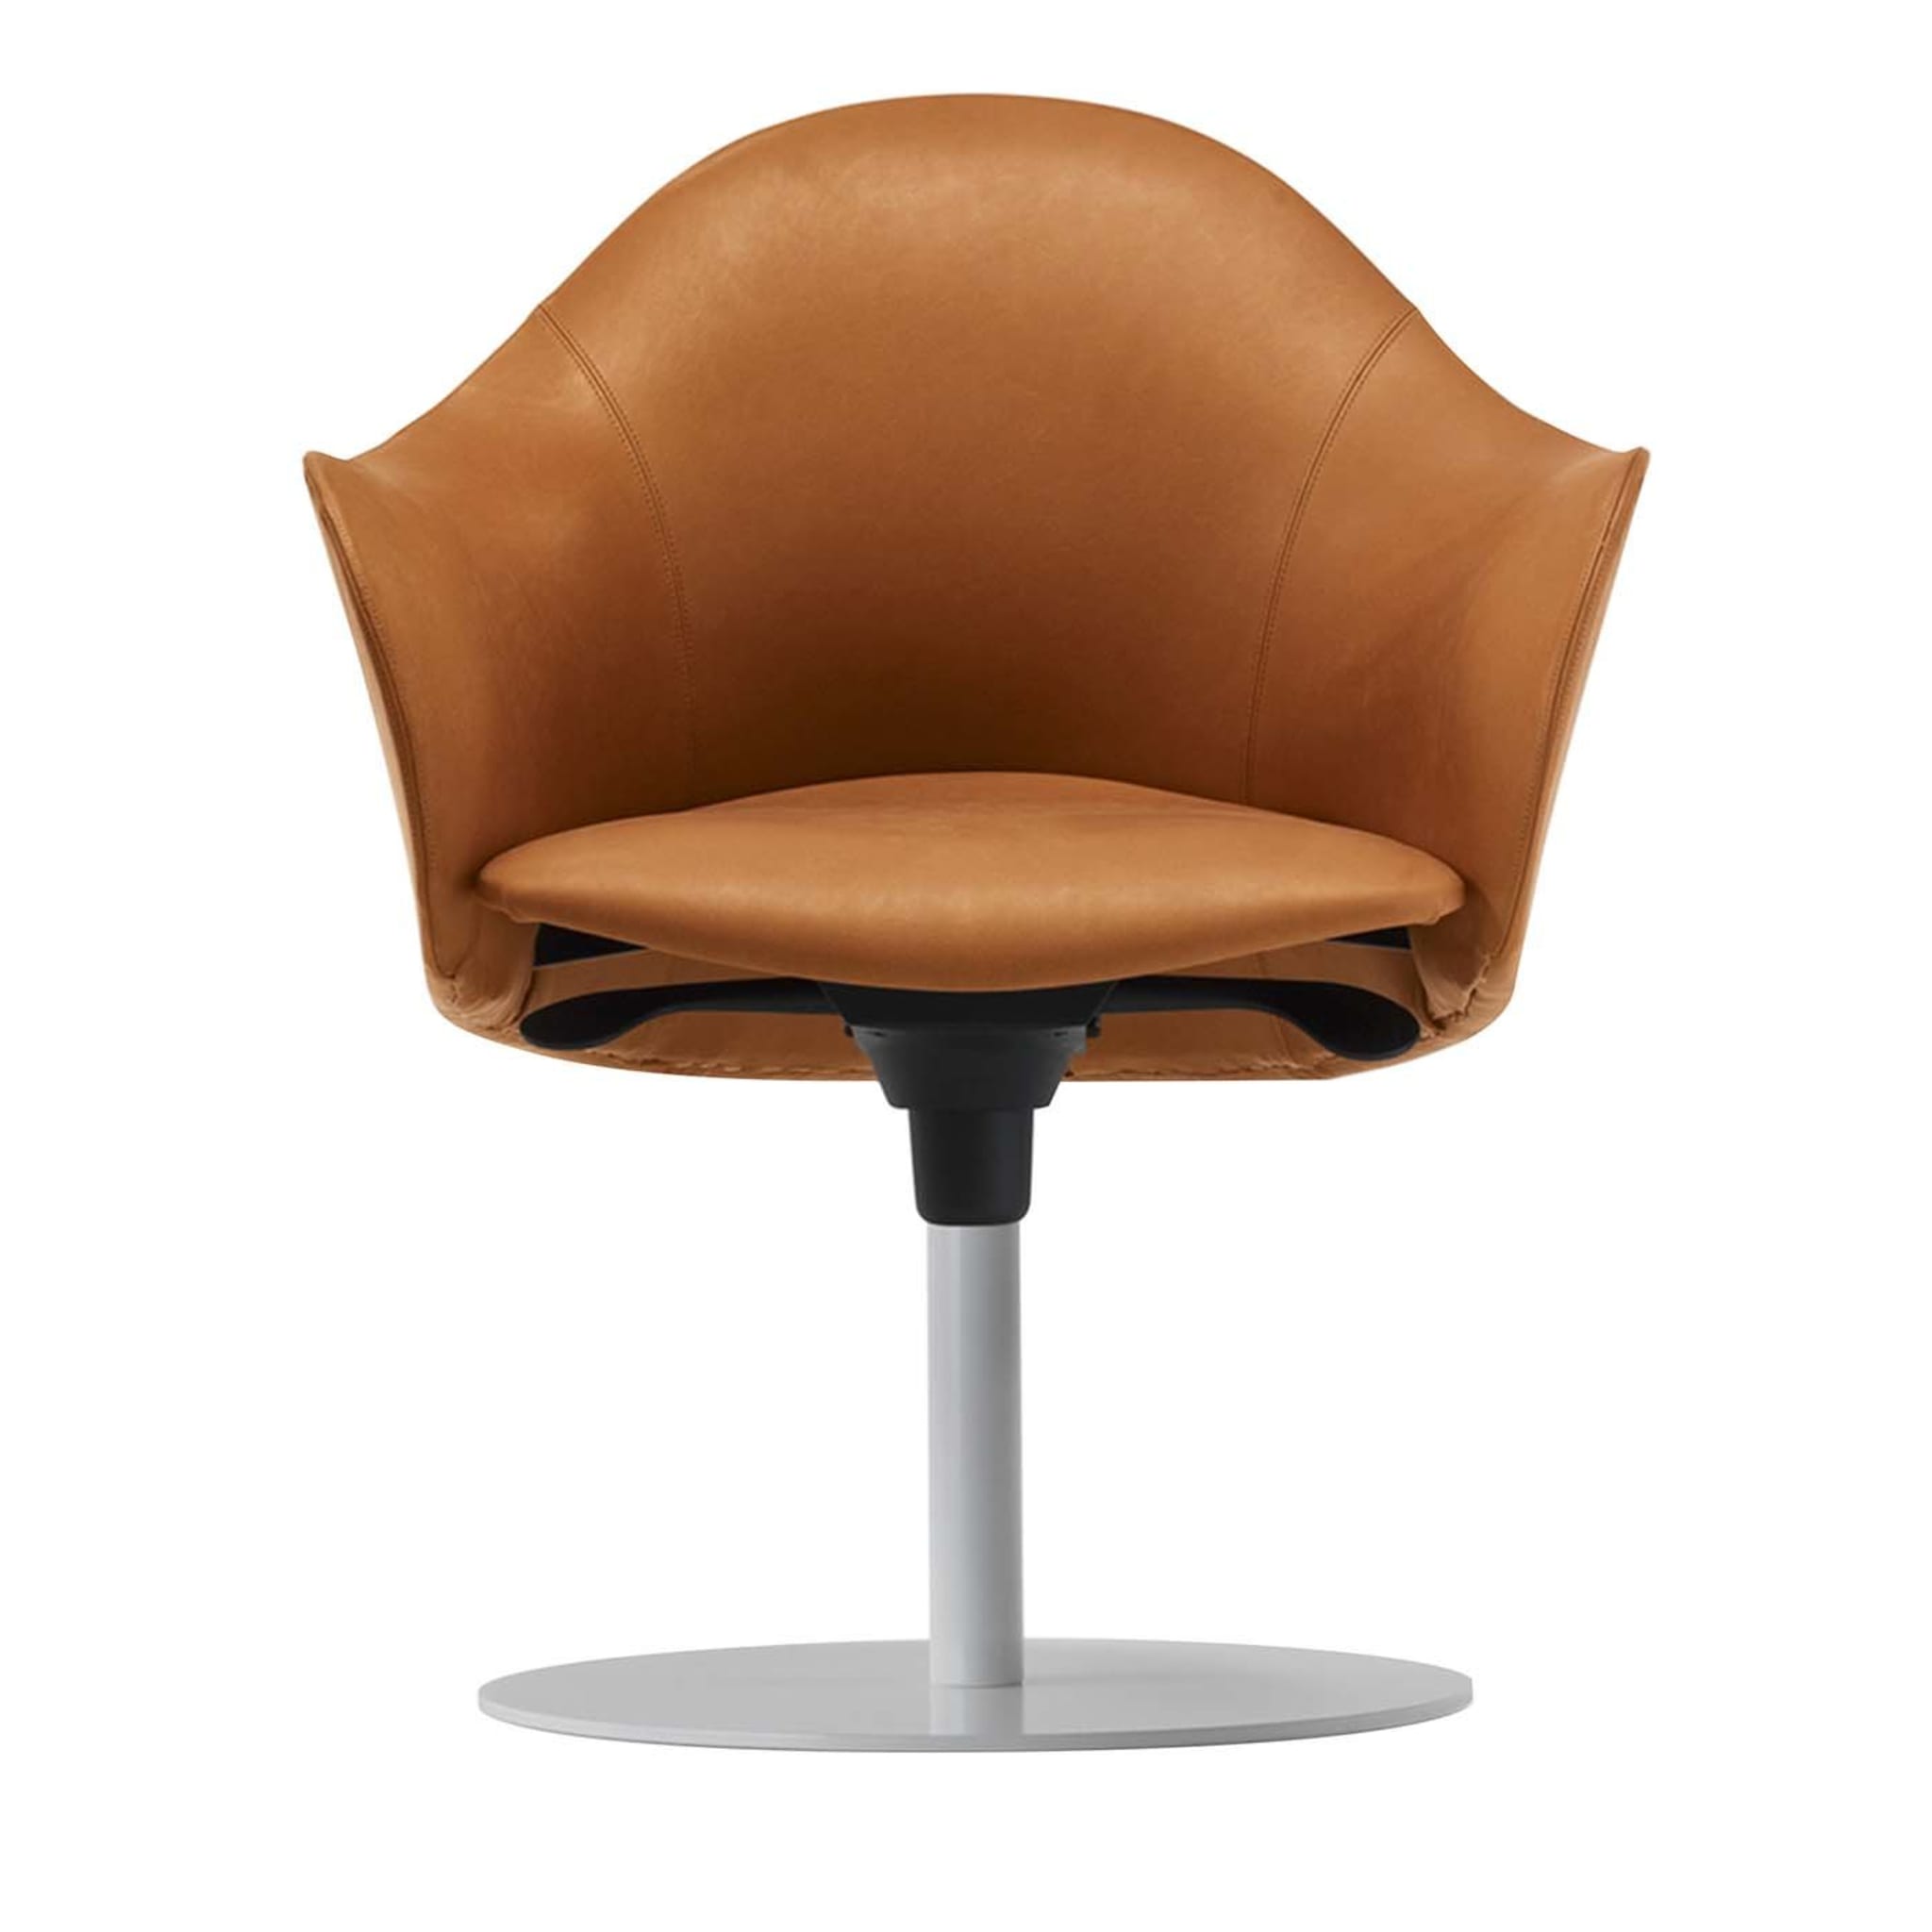 Lopod Fixed-Base Chair by Giulio Manzoni - Main view